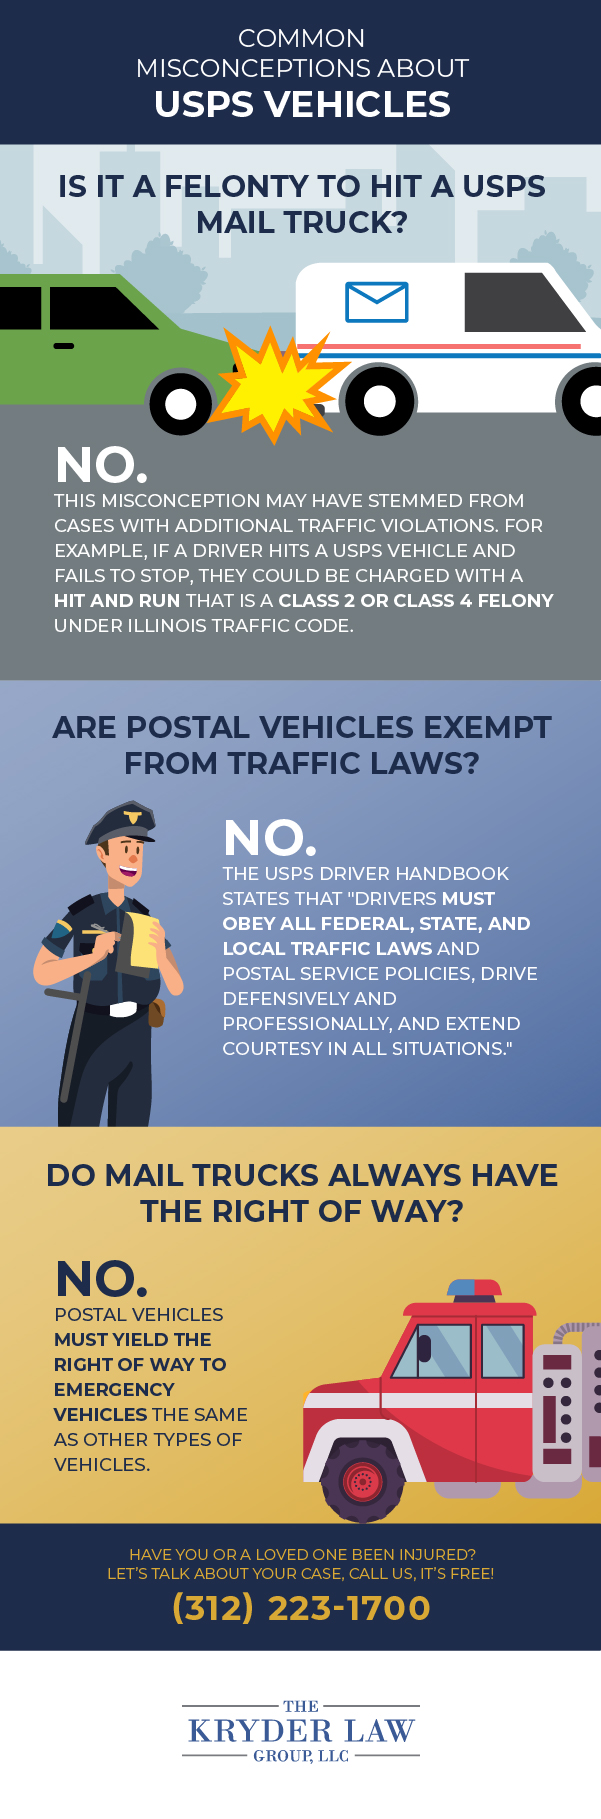 Common Misconceptions About USPS Vehicles